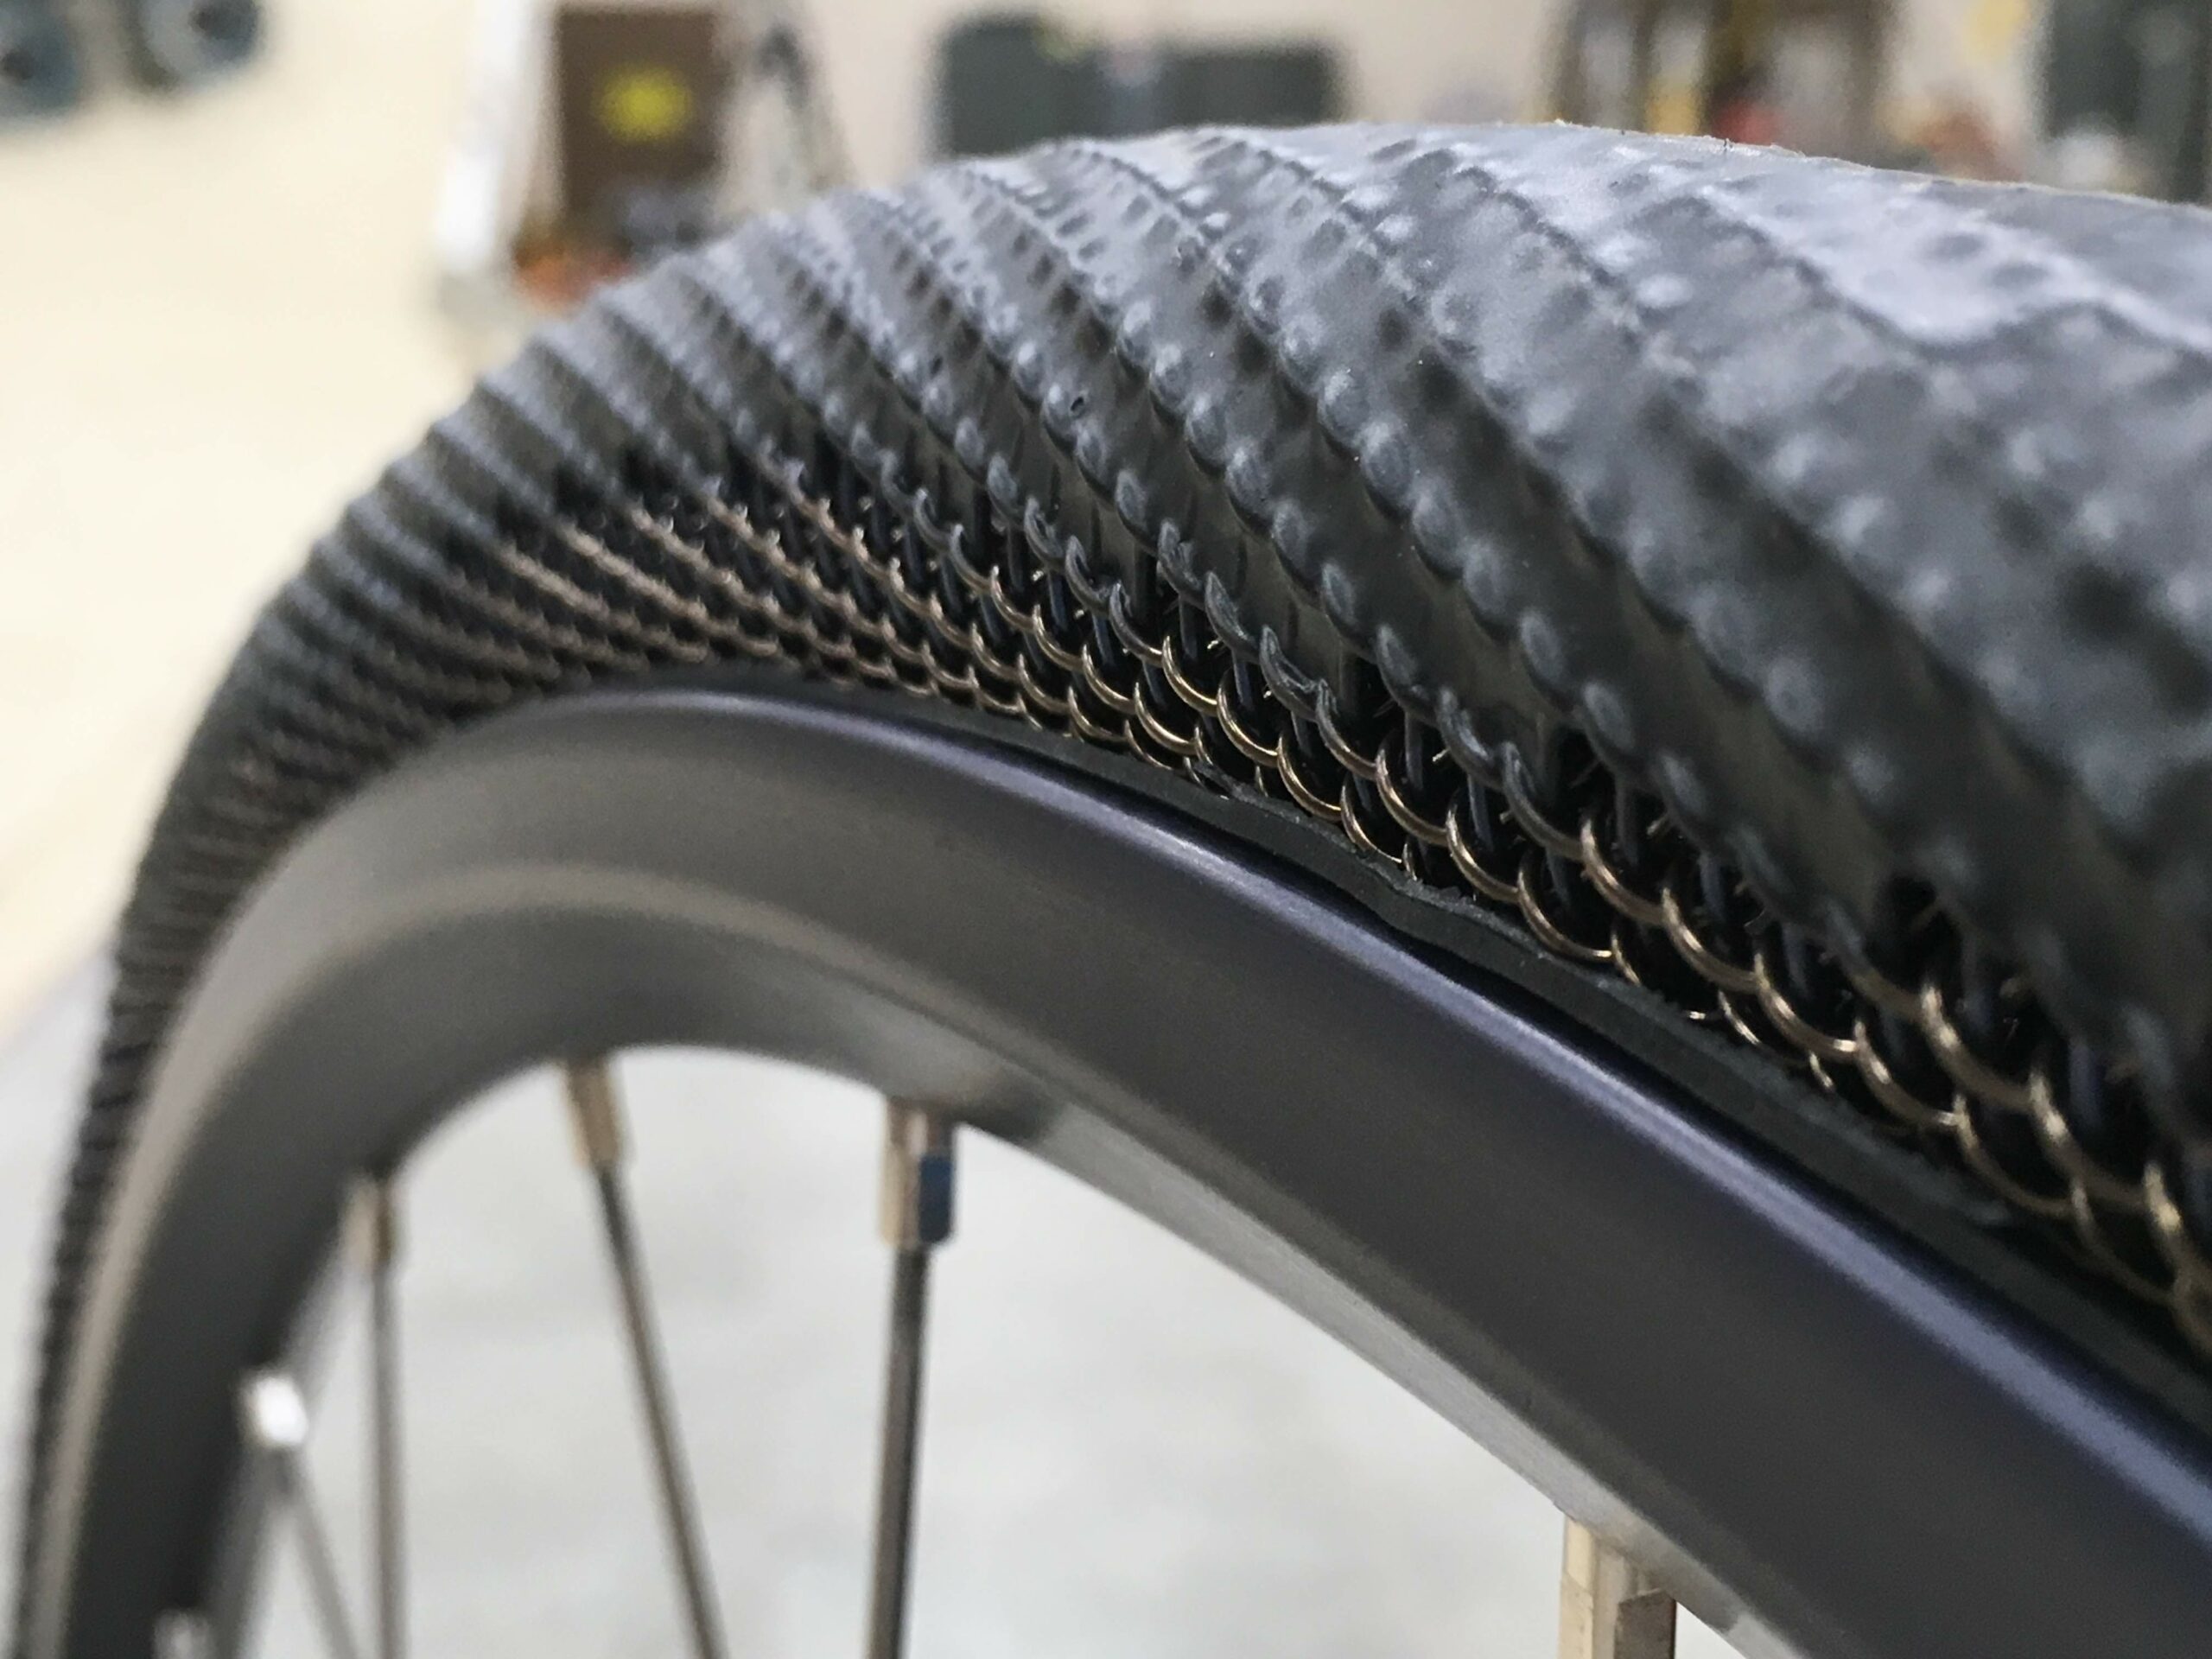 A close-up of the METL tire